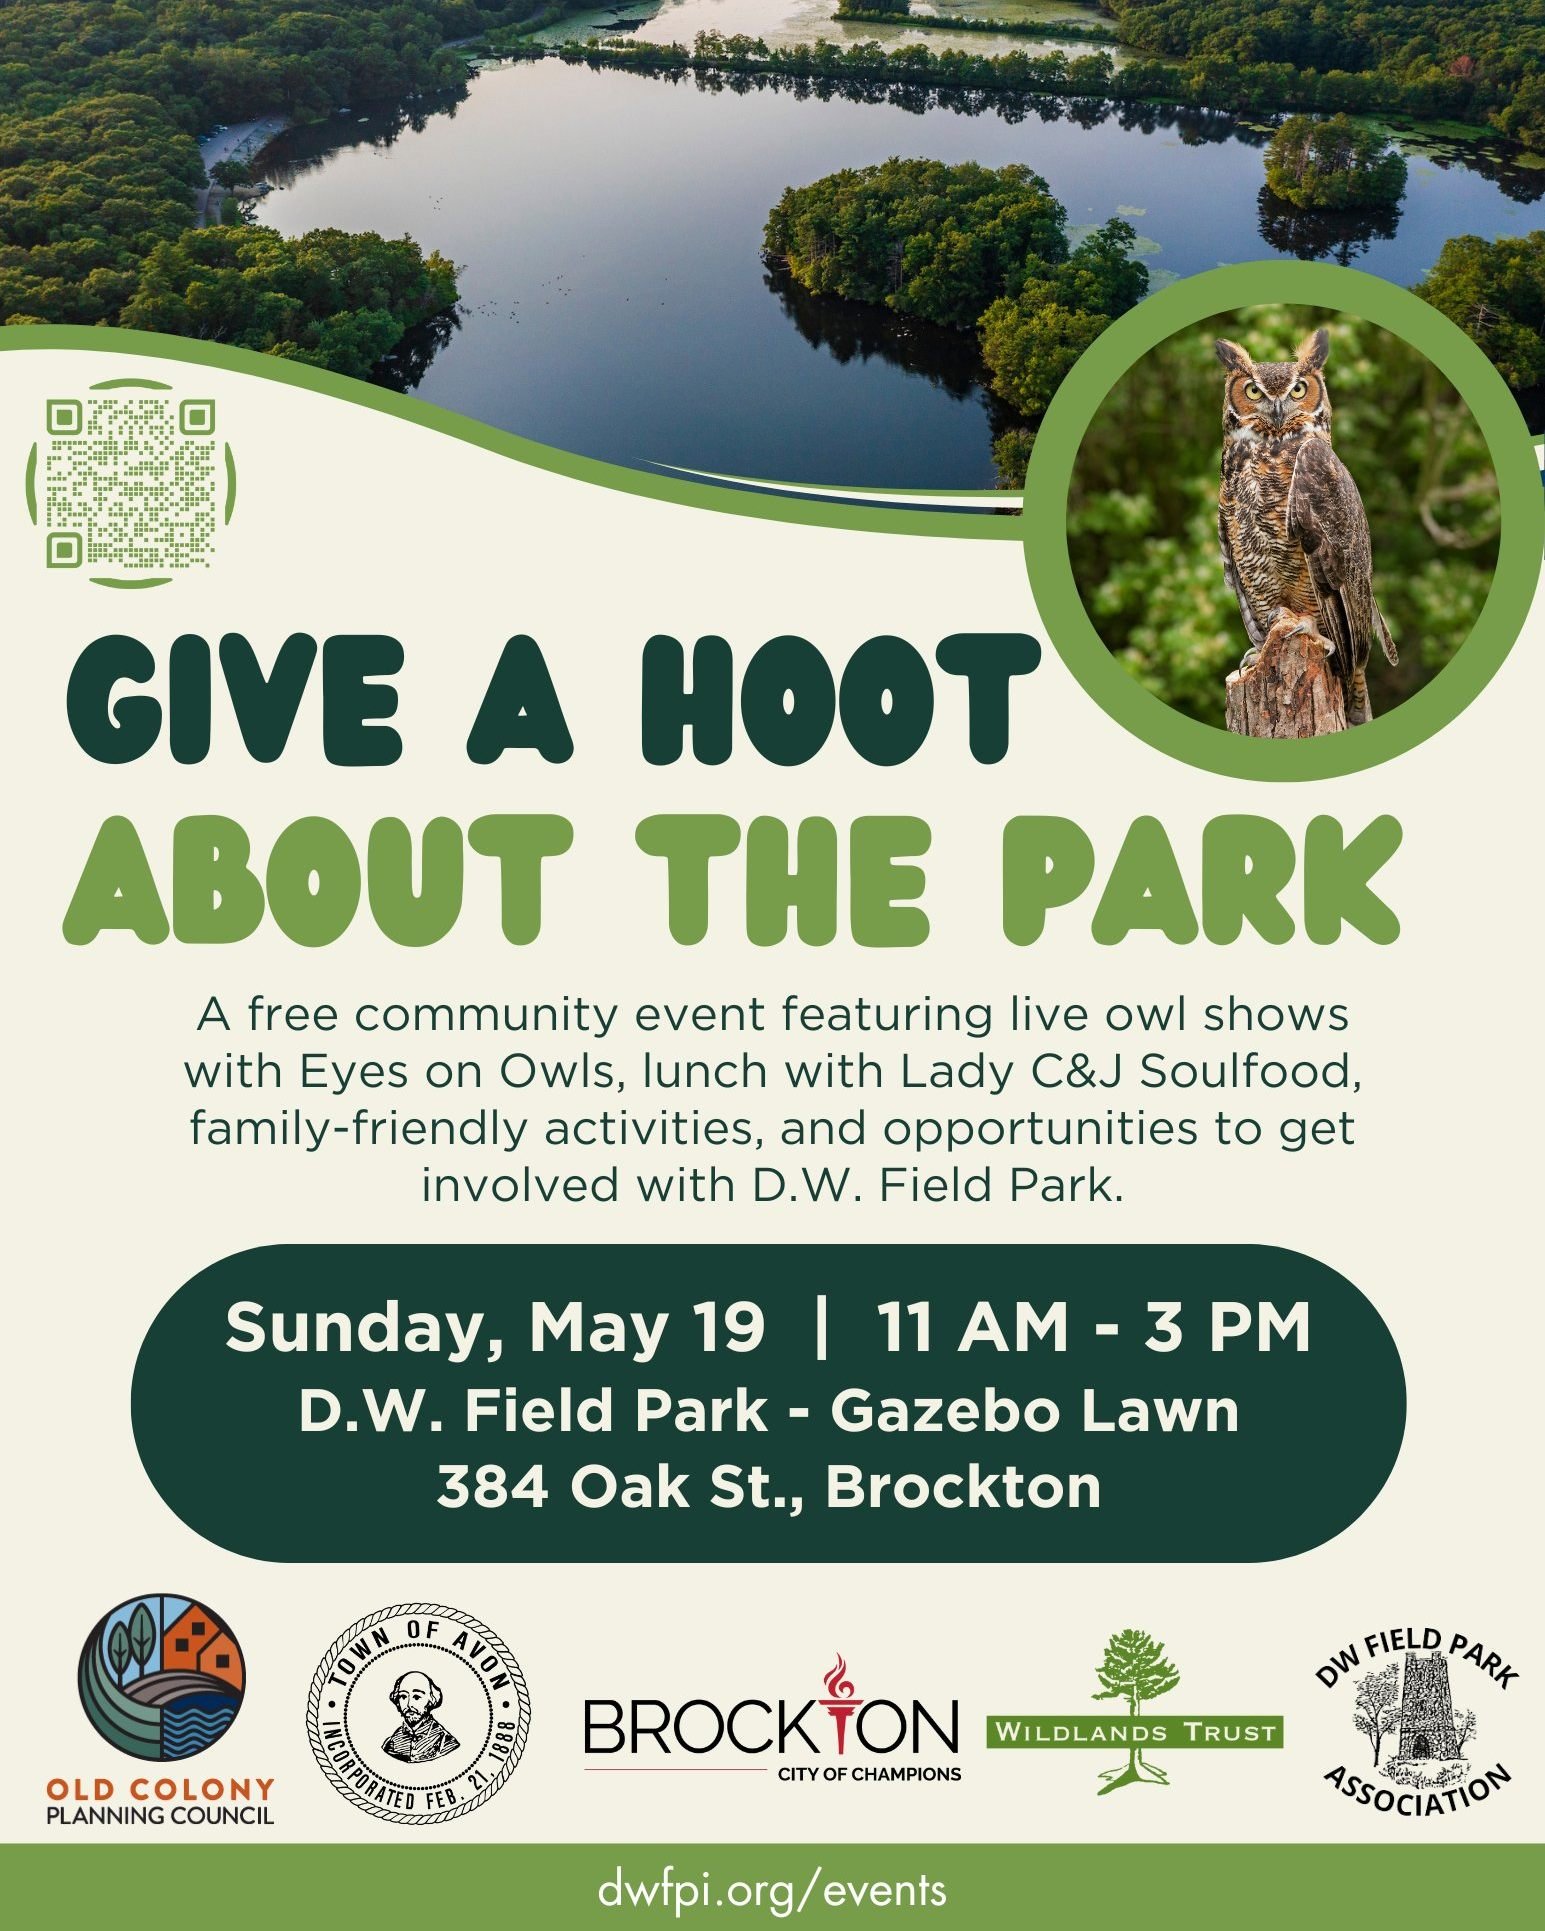 Big things are happening at D.W. Field Park. Do you give a hoot? 🦉

Join the @citybrockton, Avon, and Wildlands communities on Sunday, May 19, for a free public celebration of D.W. Field Park! Enjoy live owl shows from Eyes on Owls, lunch with @lady